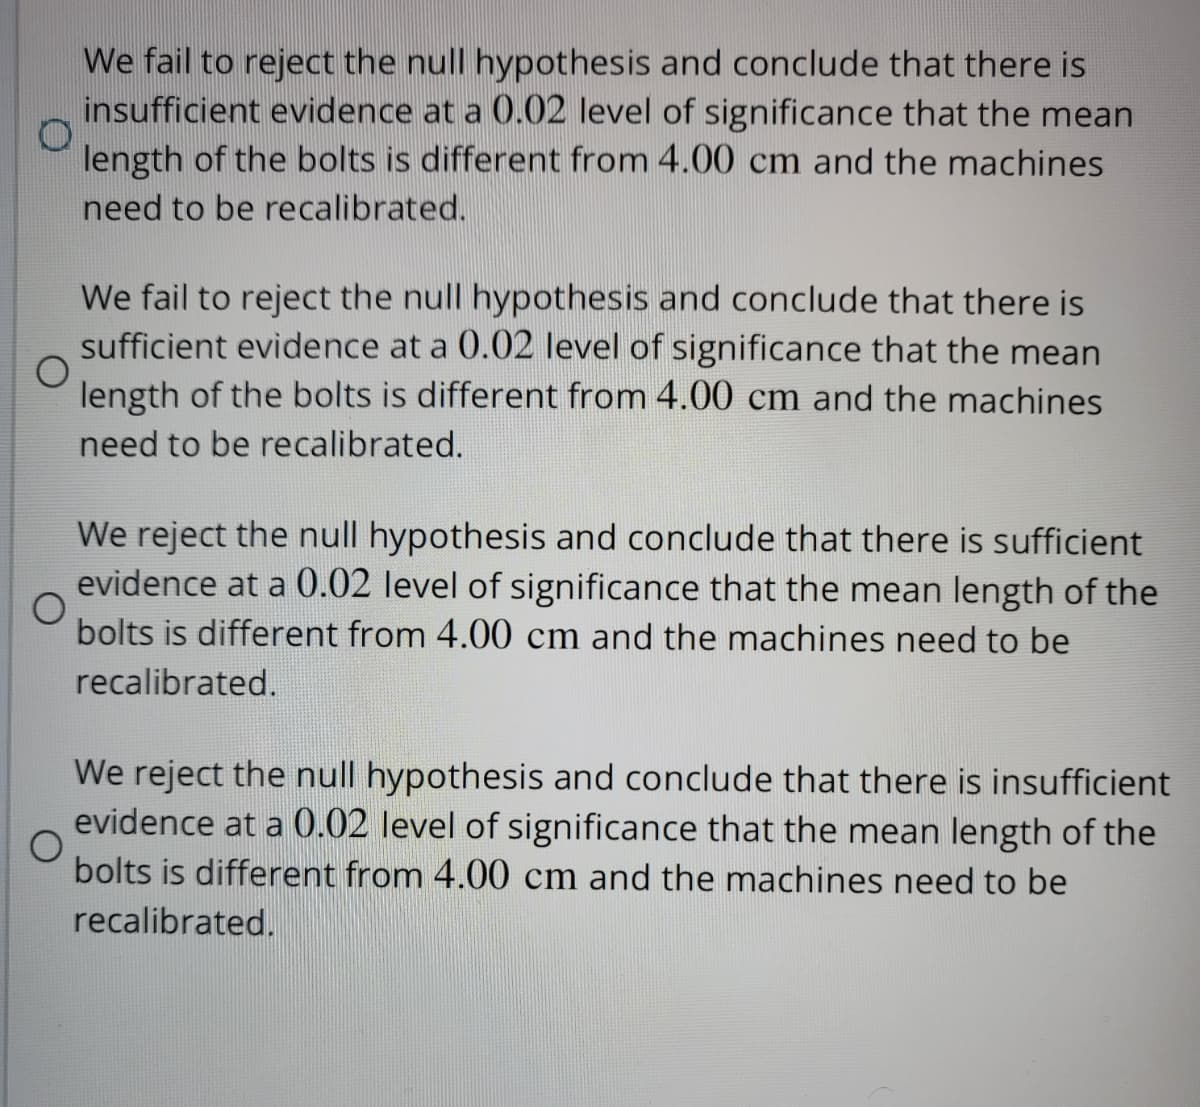 We fail to reject the null hypothesis and conclude that there is
insufficient evidence at a 0.02 level of significance that the mean
length of the bolts is different from 4.00 cm and the machines
need to be recalibrated.
O
We fail to reject the null hypothesis and conclude that there is
sufficient evidence at a 0.02 level of significance that the mean
length of the bolts is different from 4.00 cm and the machines
need to be recalibrated.
We reject the null hypothesis and conclude that there is sufficient
evidence at a 0.02 level of significance that the mean length of the
bolts is different from 4.00 cm and the machines need to be
recalibrated.
We reject the null hypothesis and conclude that there is insufficient
evidence at a 0.02 level of significance that the mean length of the
bolts is different from 4.00 cm and the machines need to be
O
recalibrated.